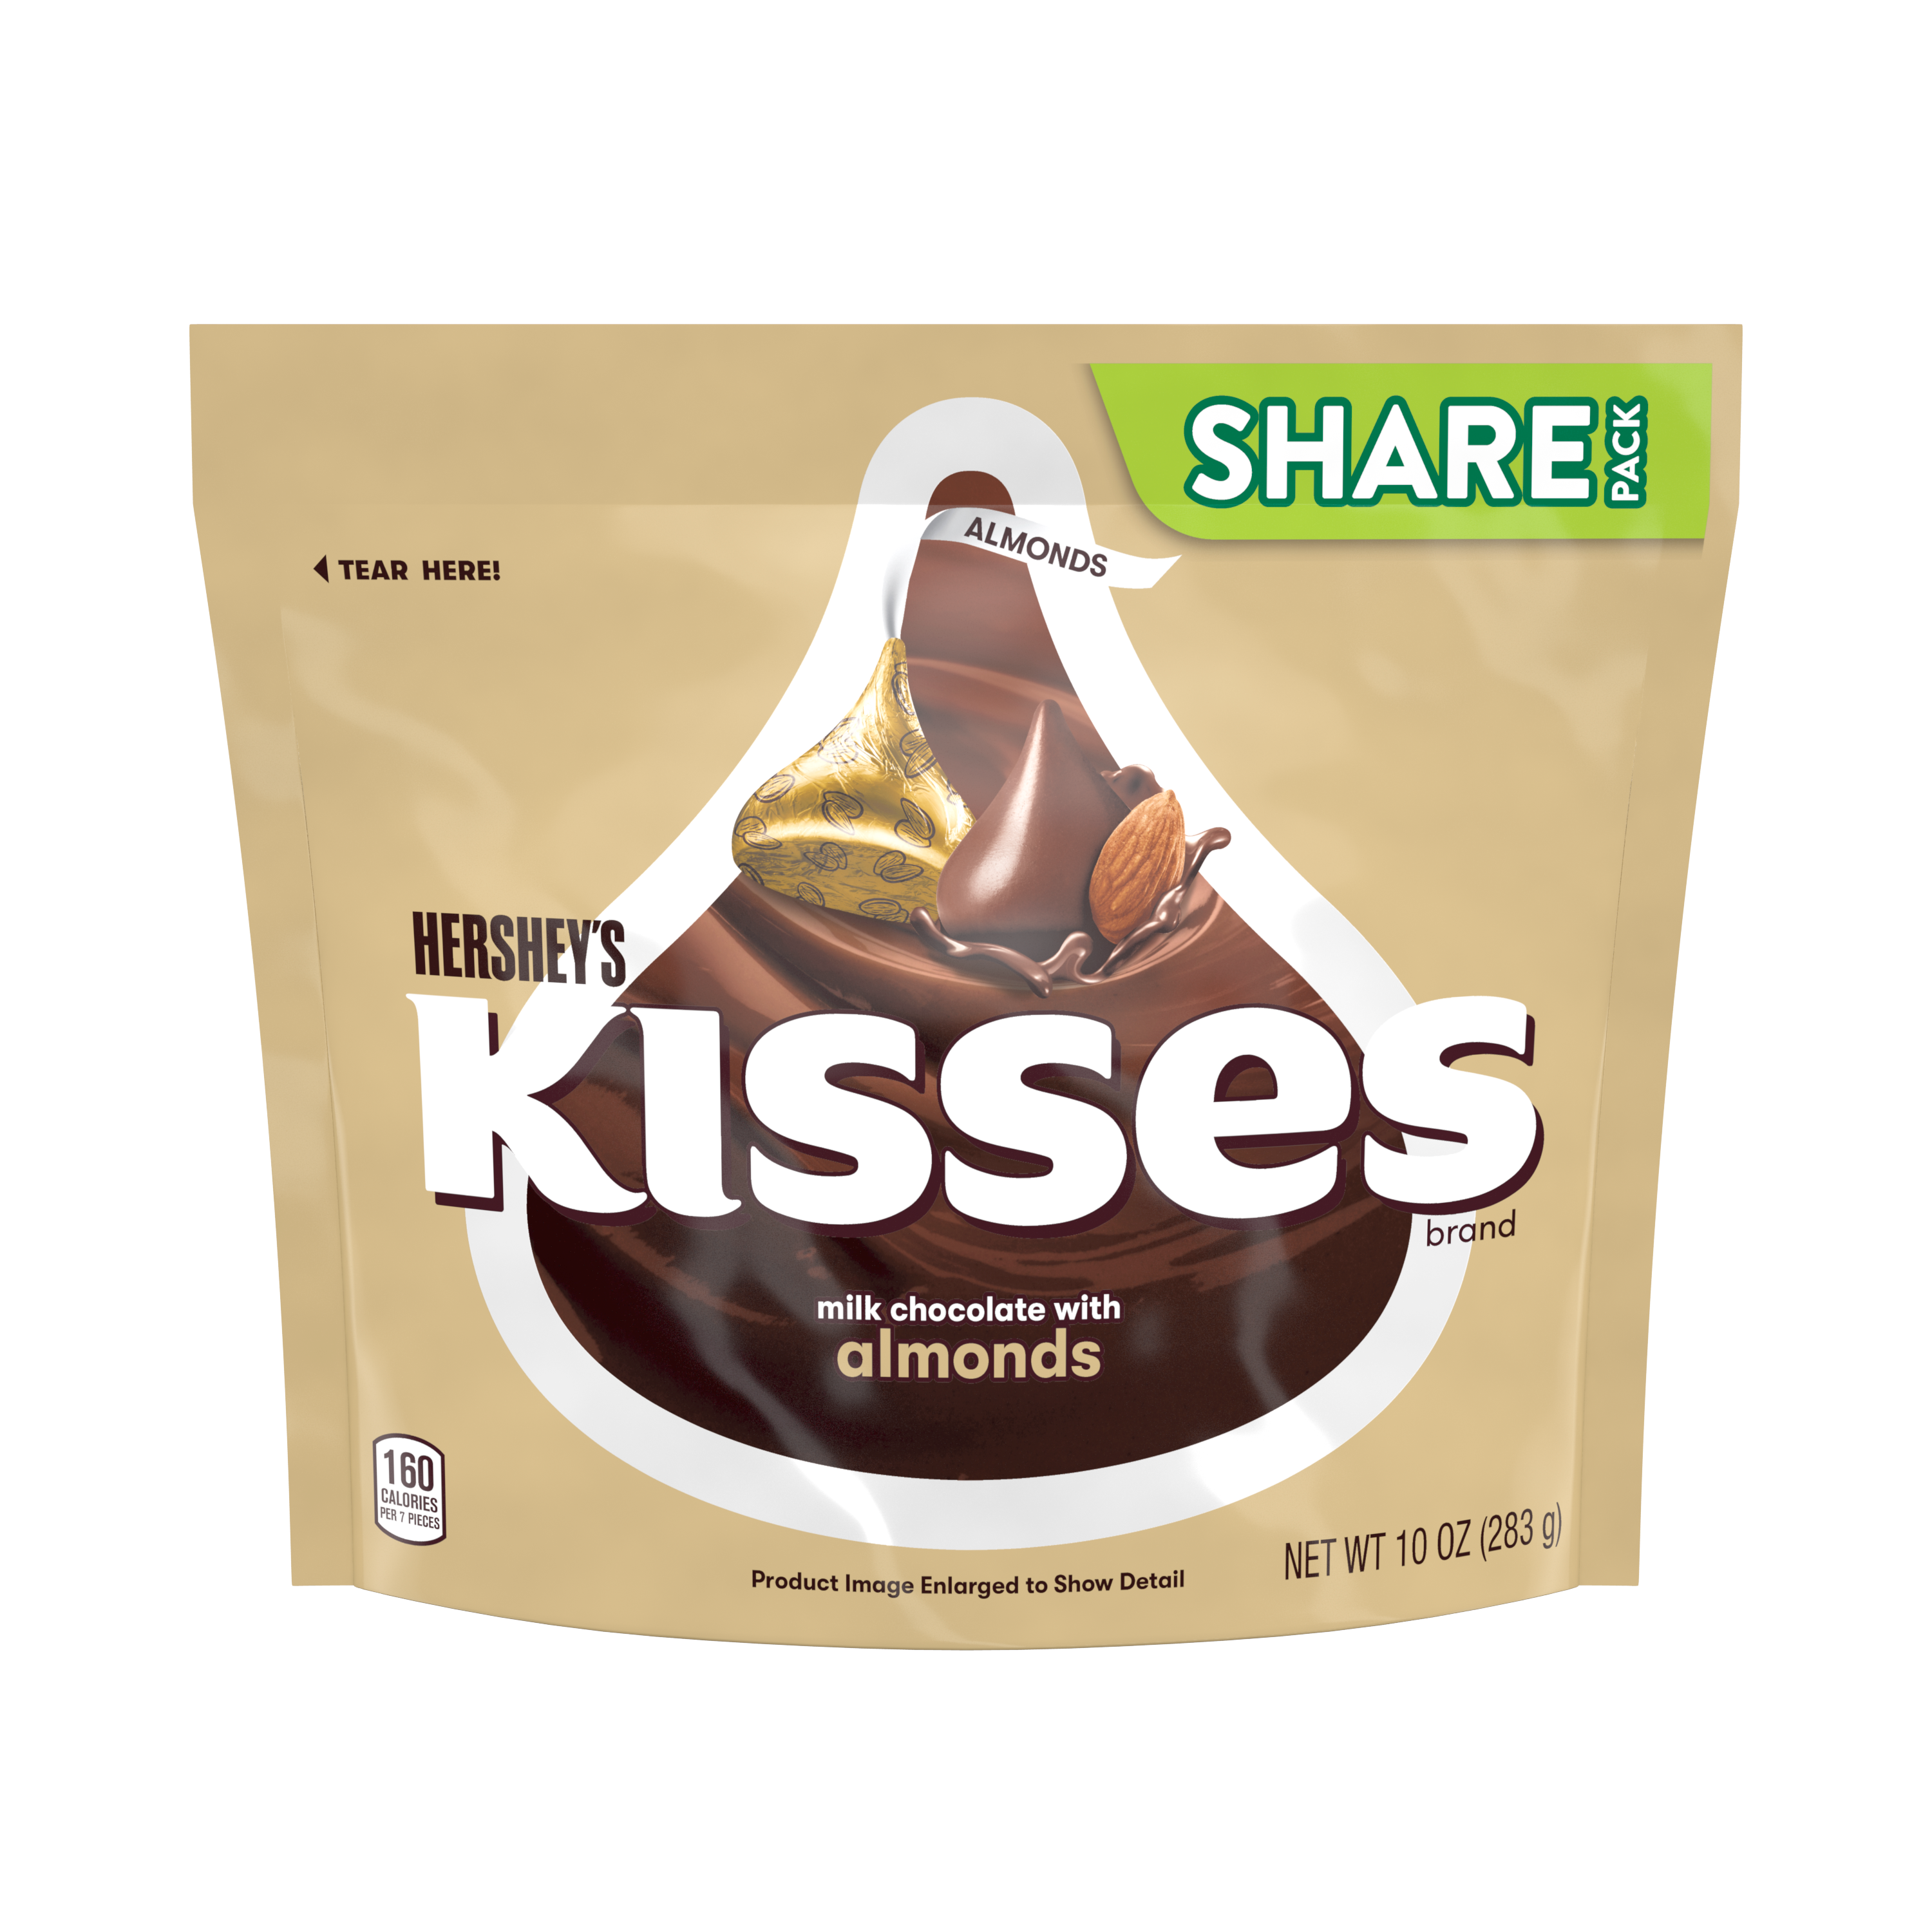 HERSHEY'S KISSES Milk Chocolate with Almonds Candy, 10 oz pack - Front of Package